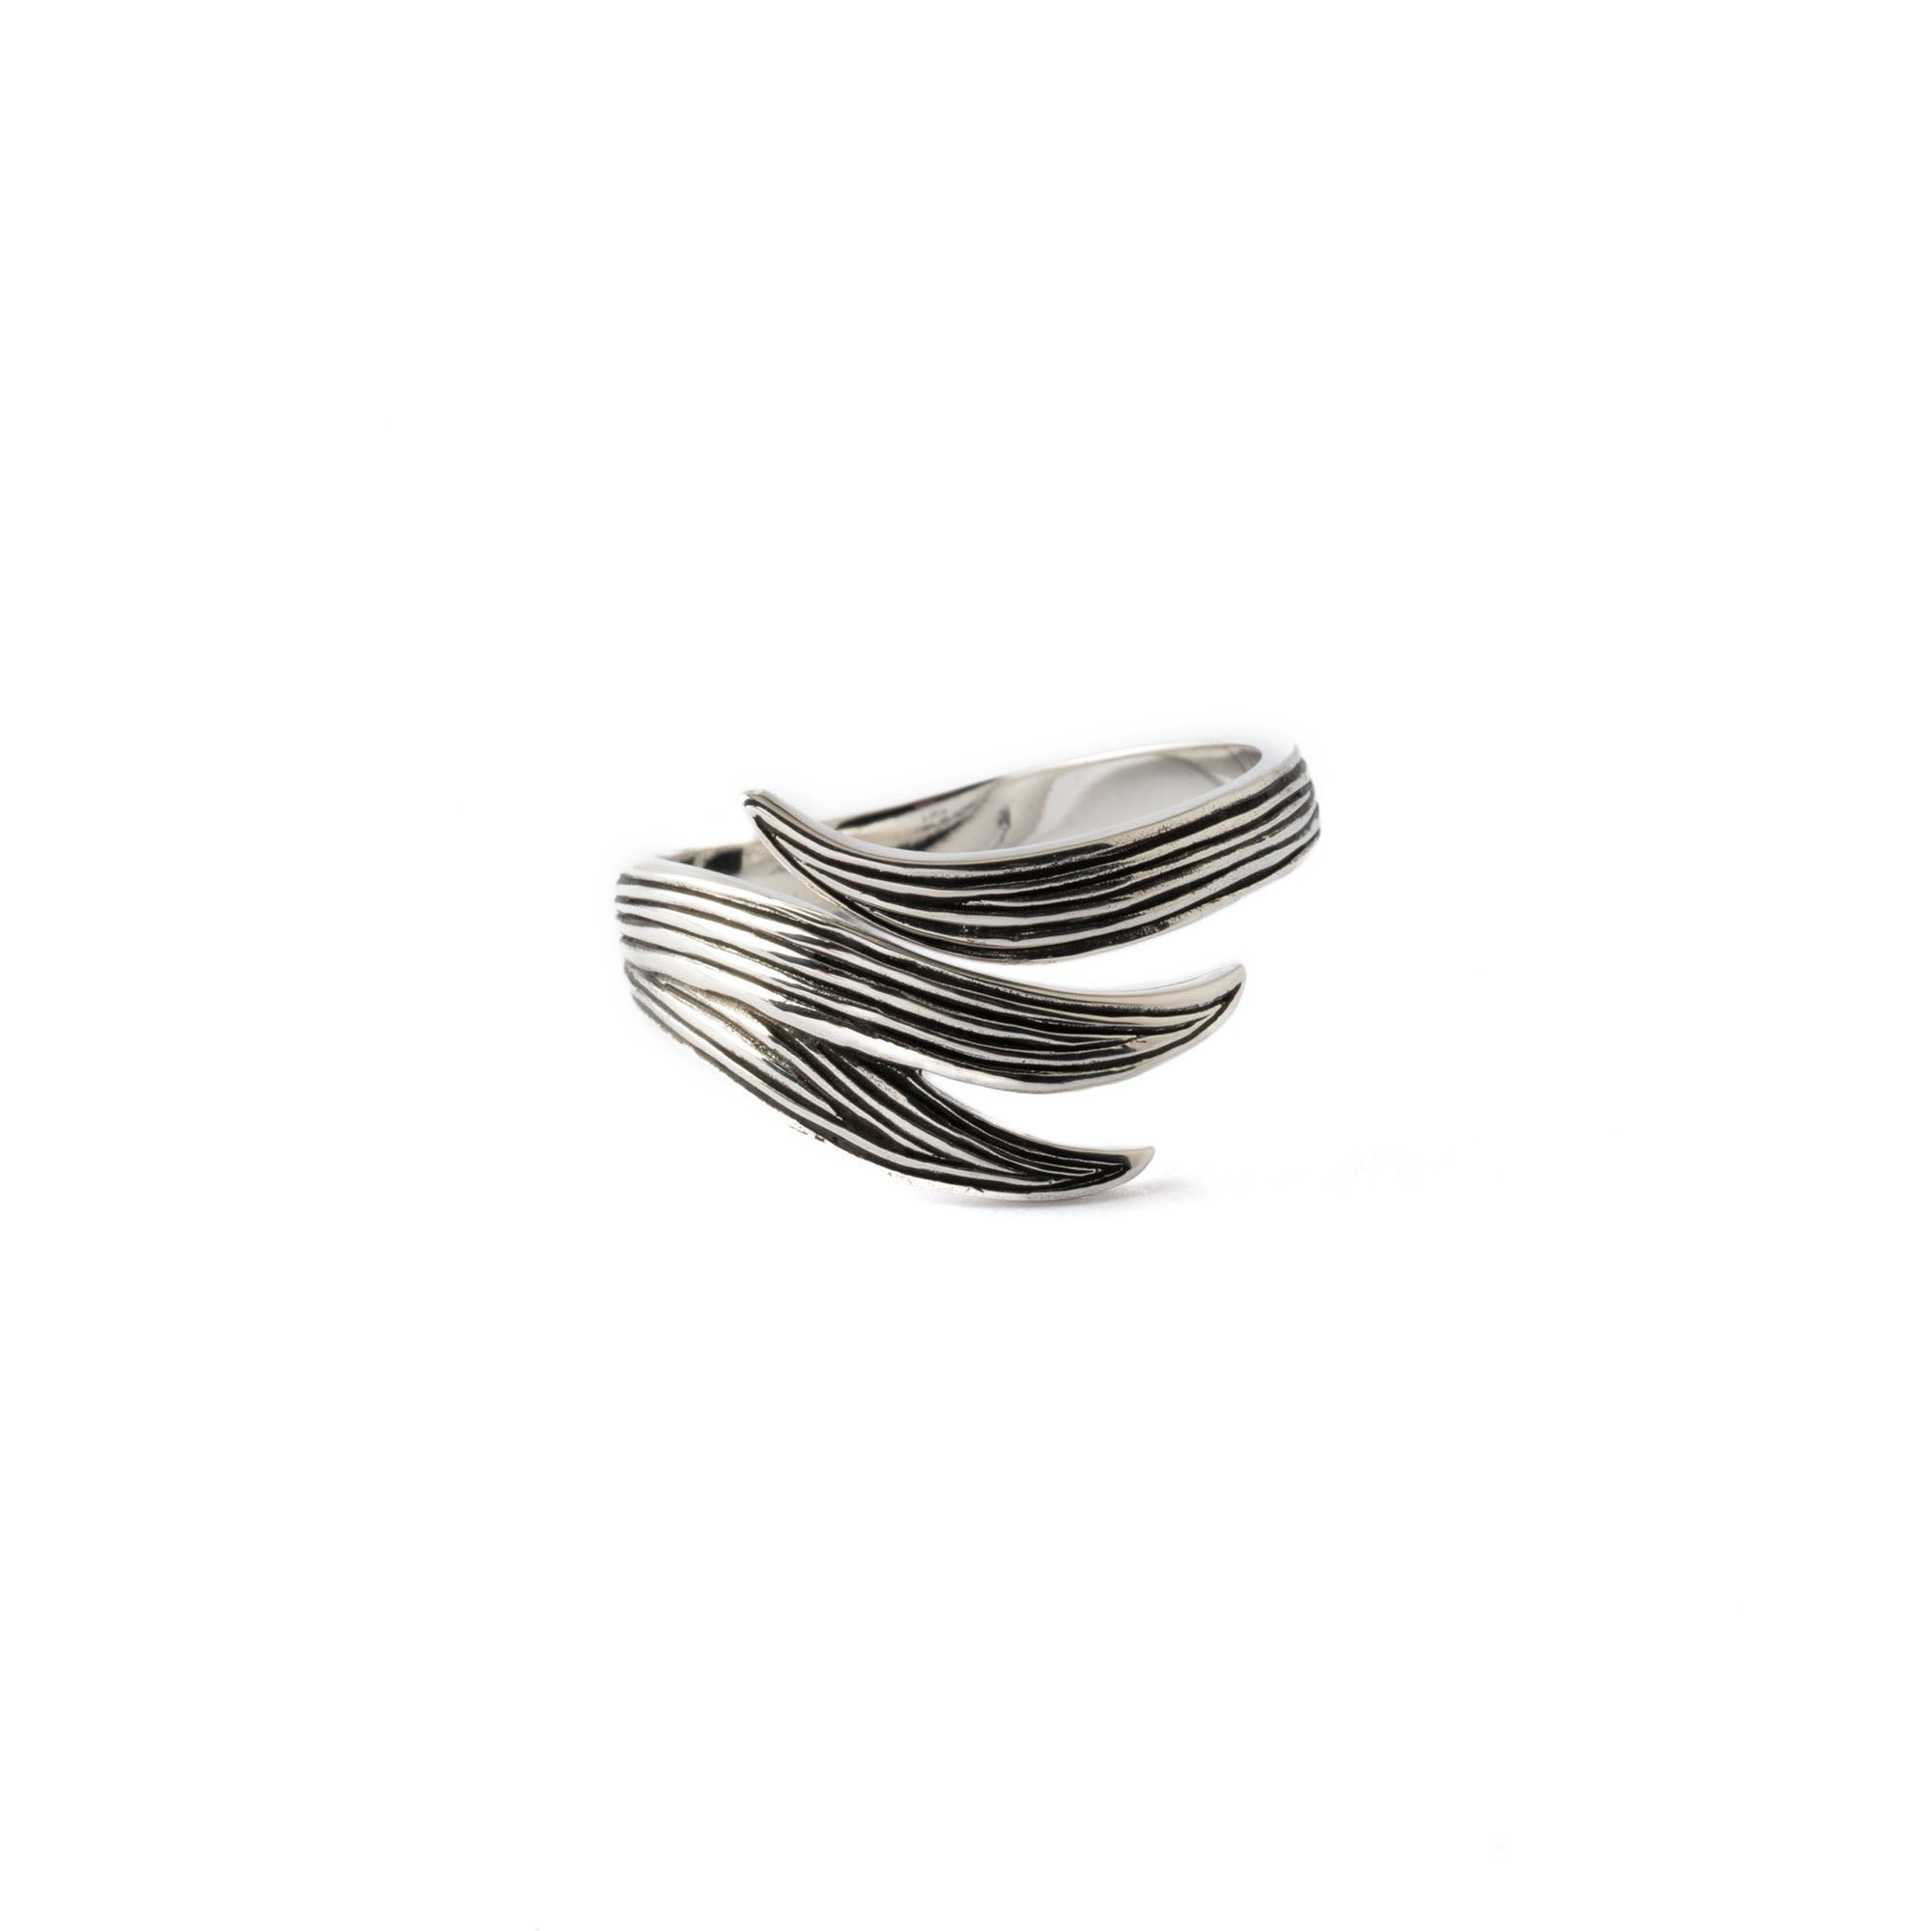 Long Leaf Silver Ring second side frontal view